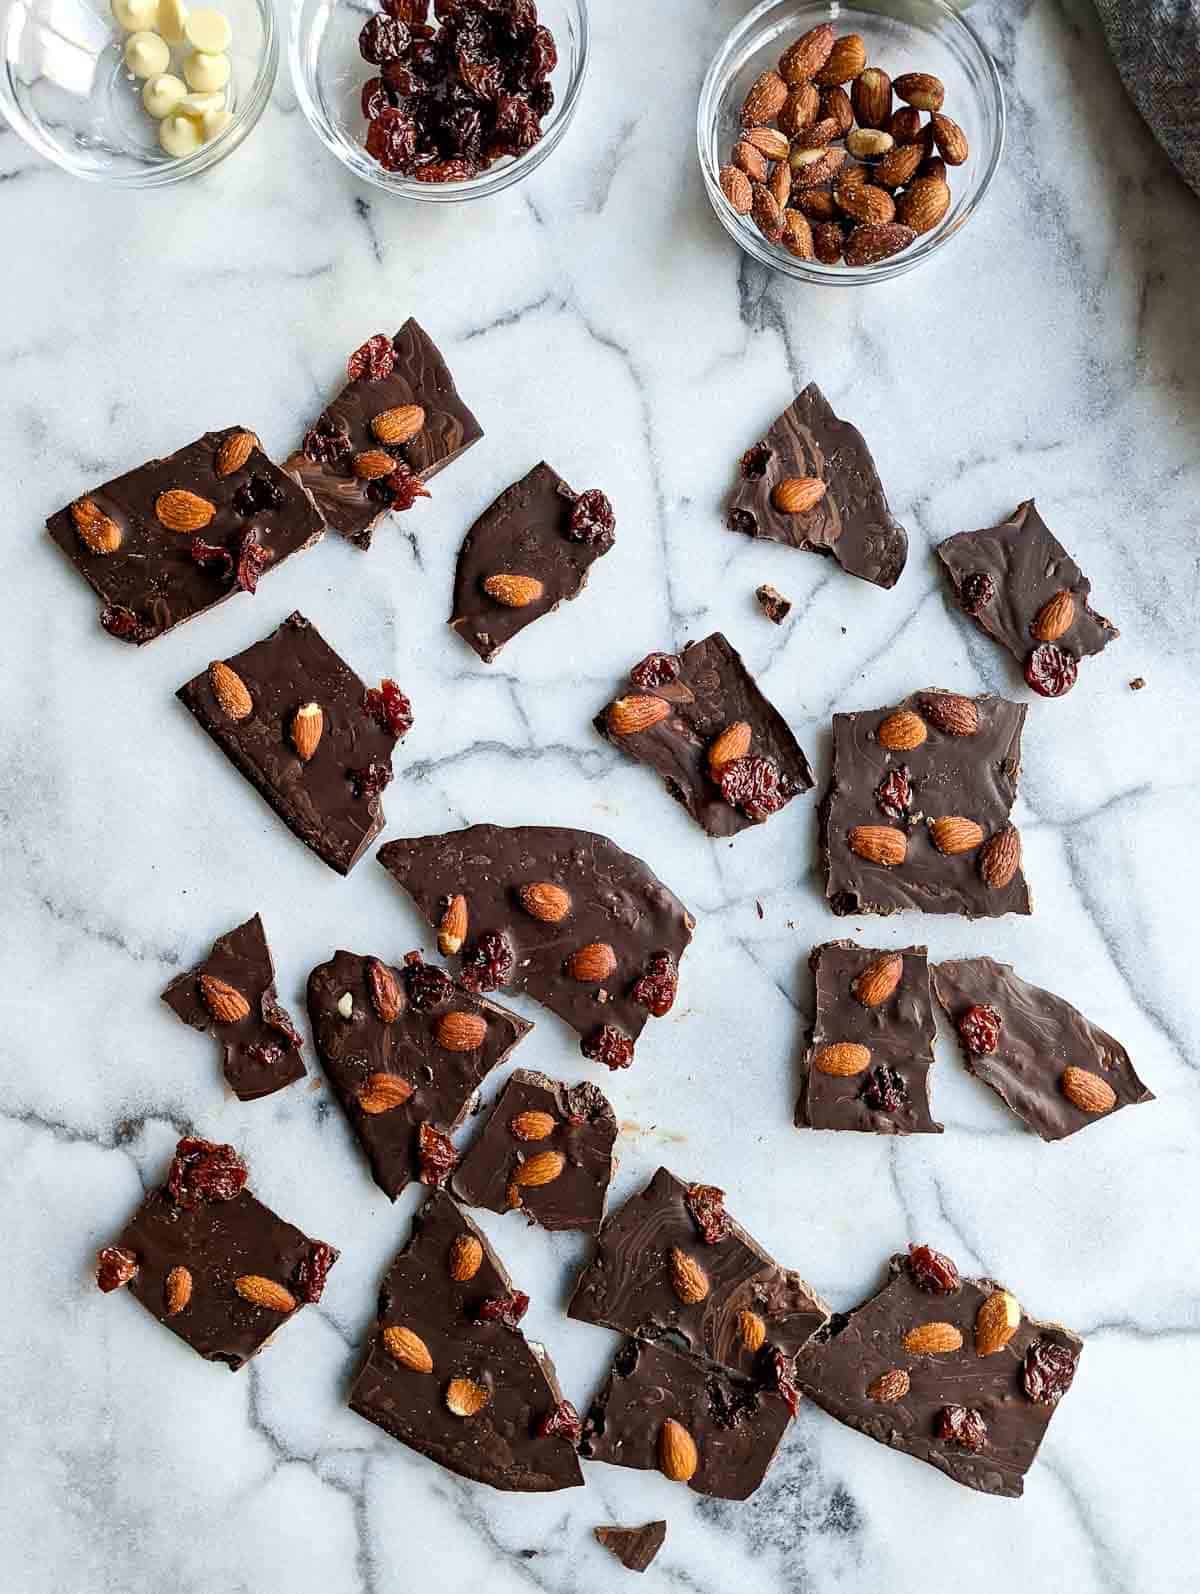 chocolate bark with cherries and almonds on cutting board.